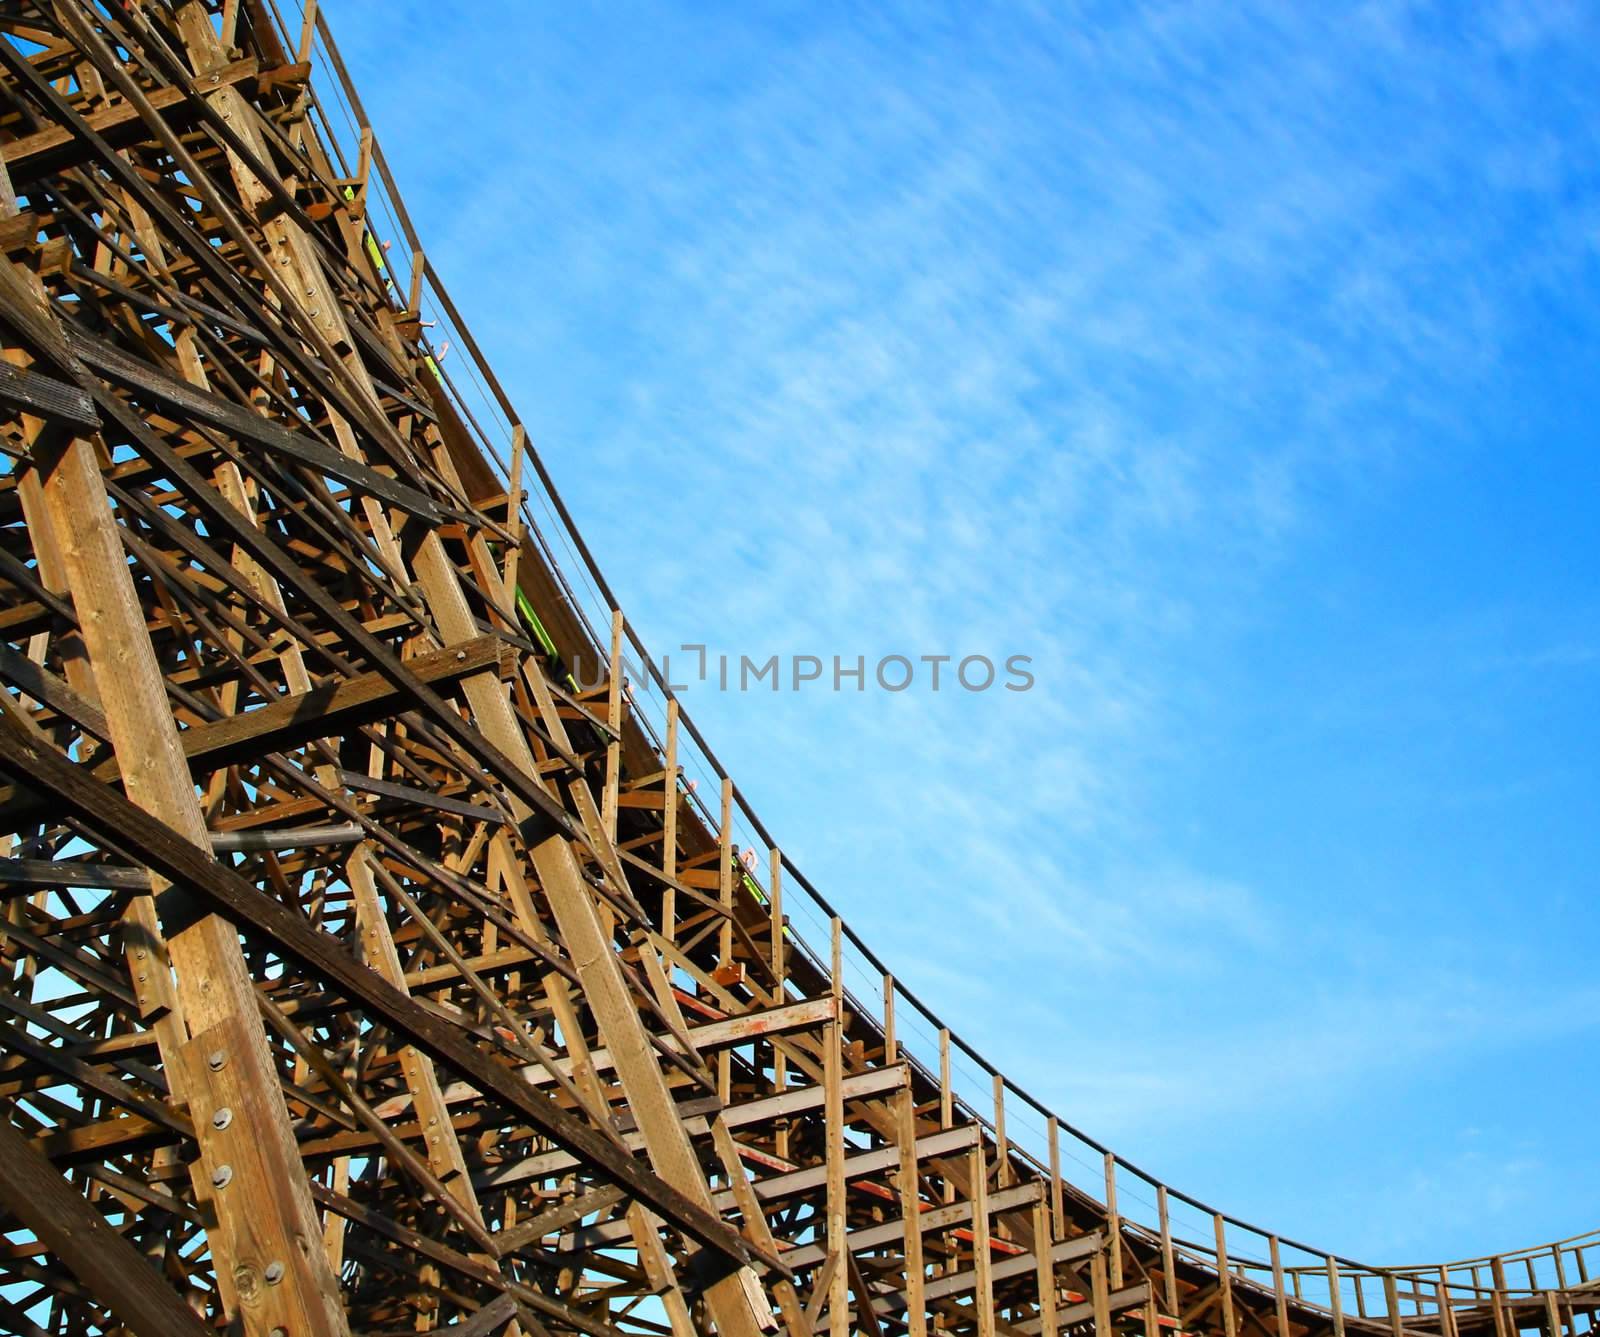 Scary joy ride down an old giant wooden roller coaster on a beautiful day at the amusement park.